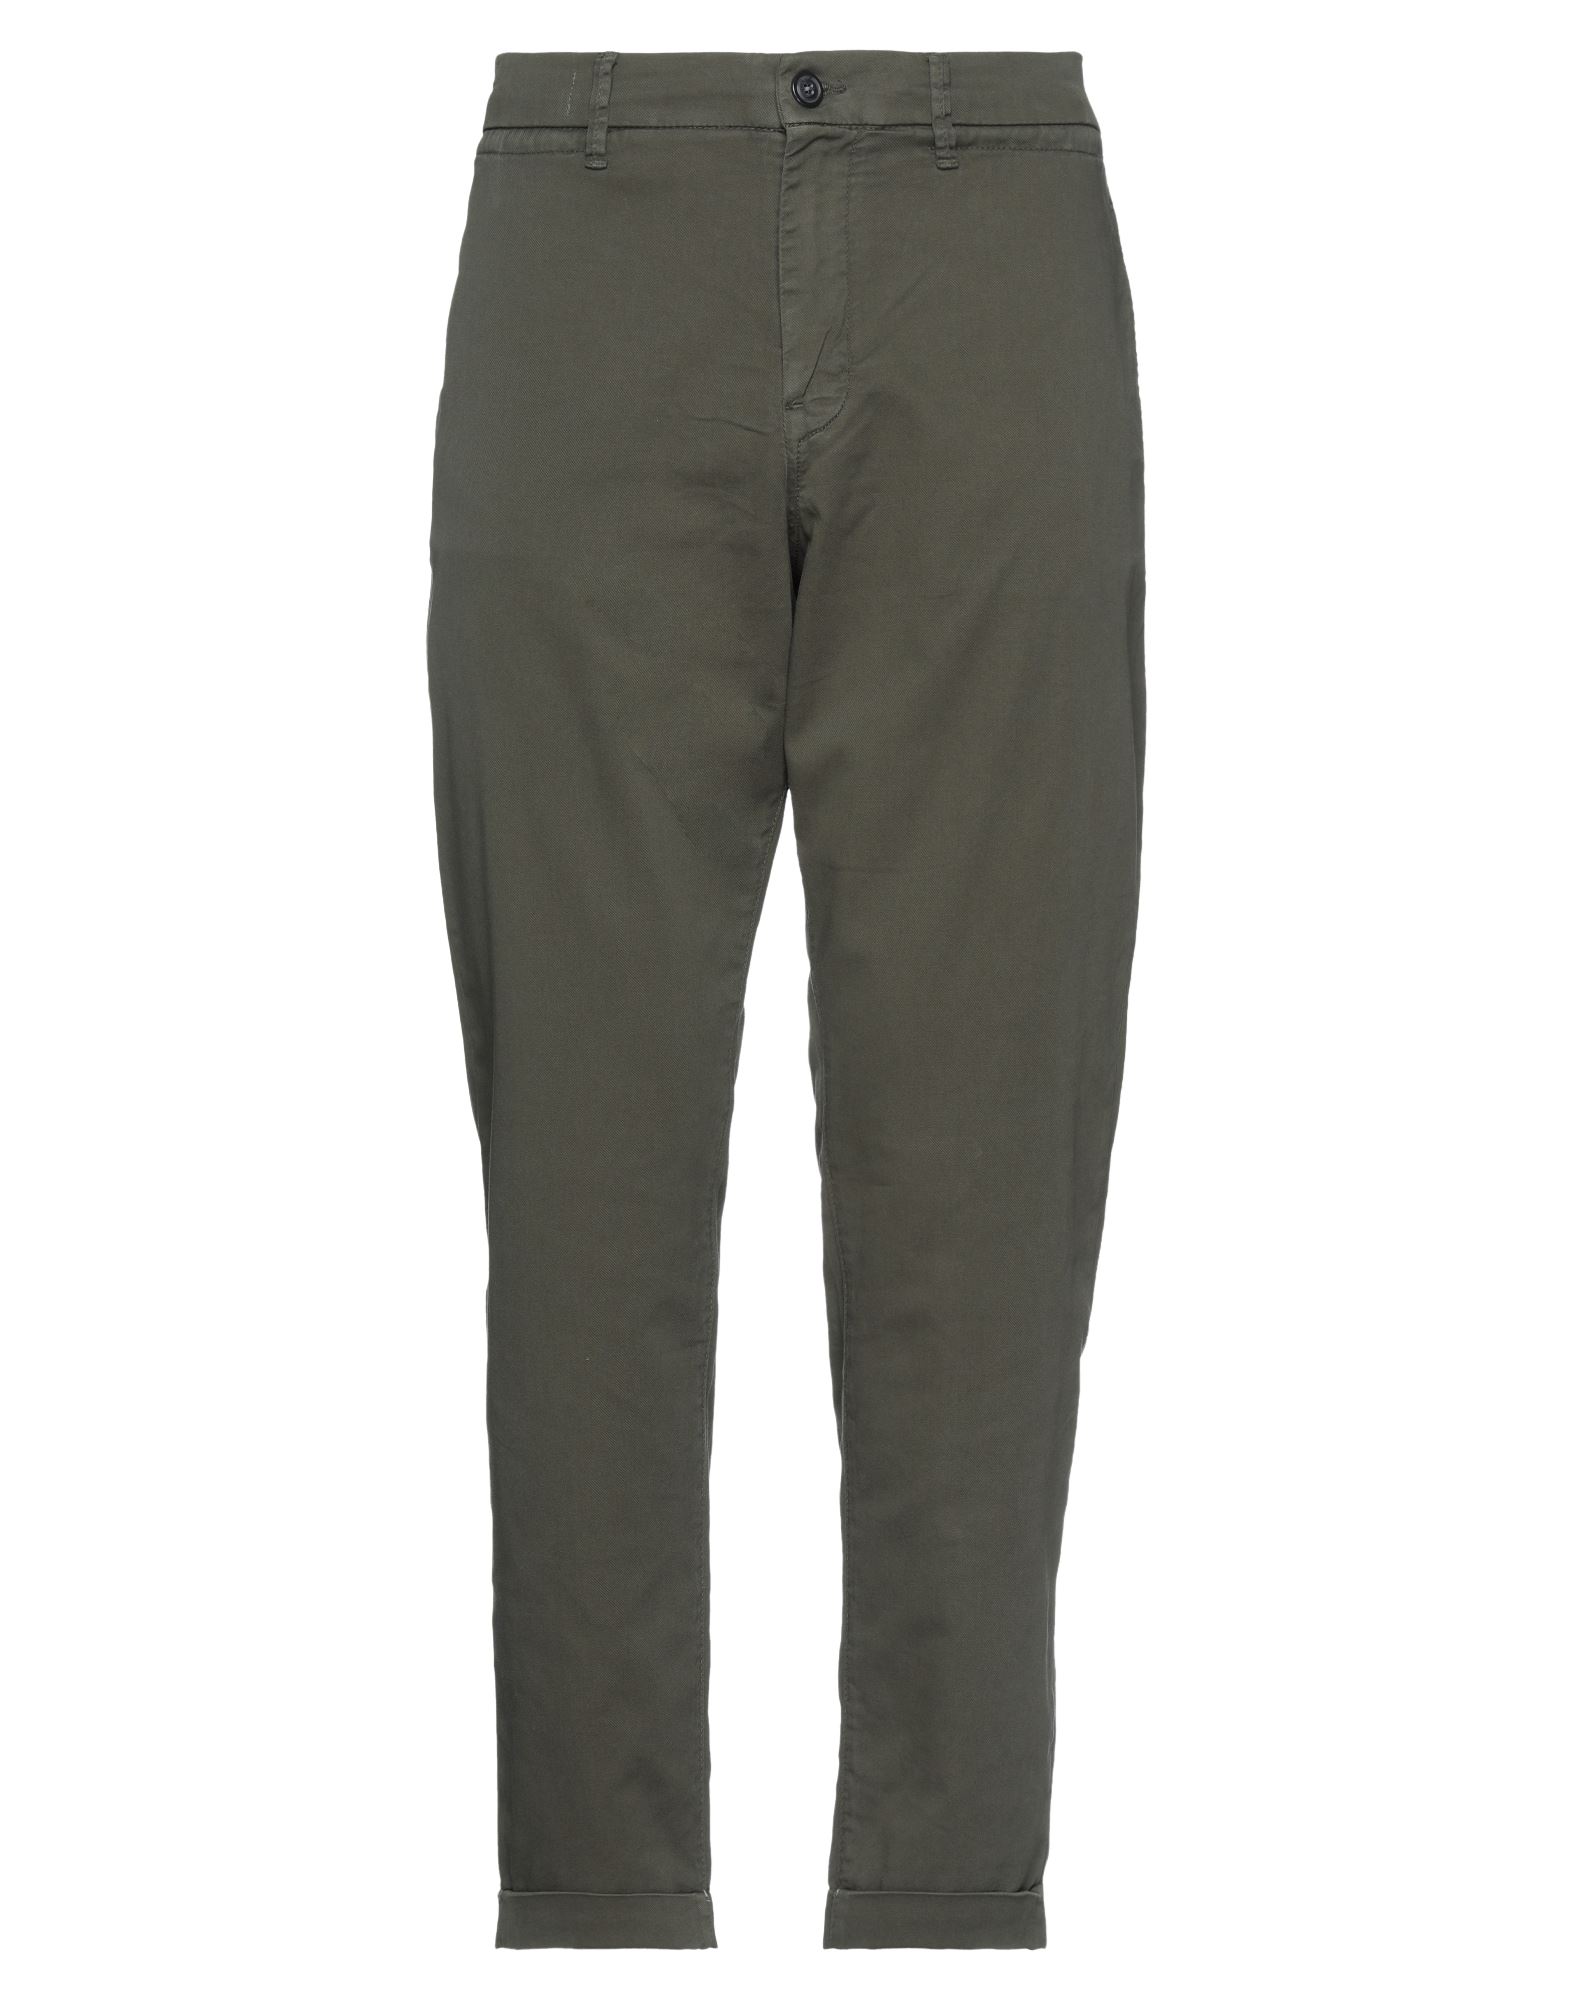 SELECTED HOMME SELECTED HOMME MAN PANTS MILITARY GREEN SIZE 30W-32L ORGANIC COTTON, POLYESTER, ELASTANE